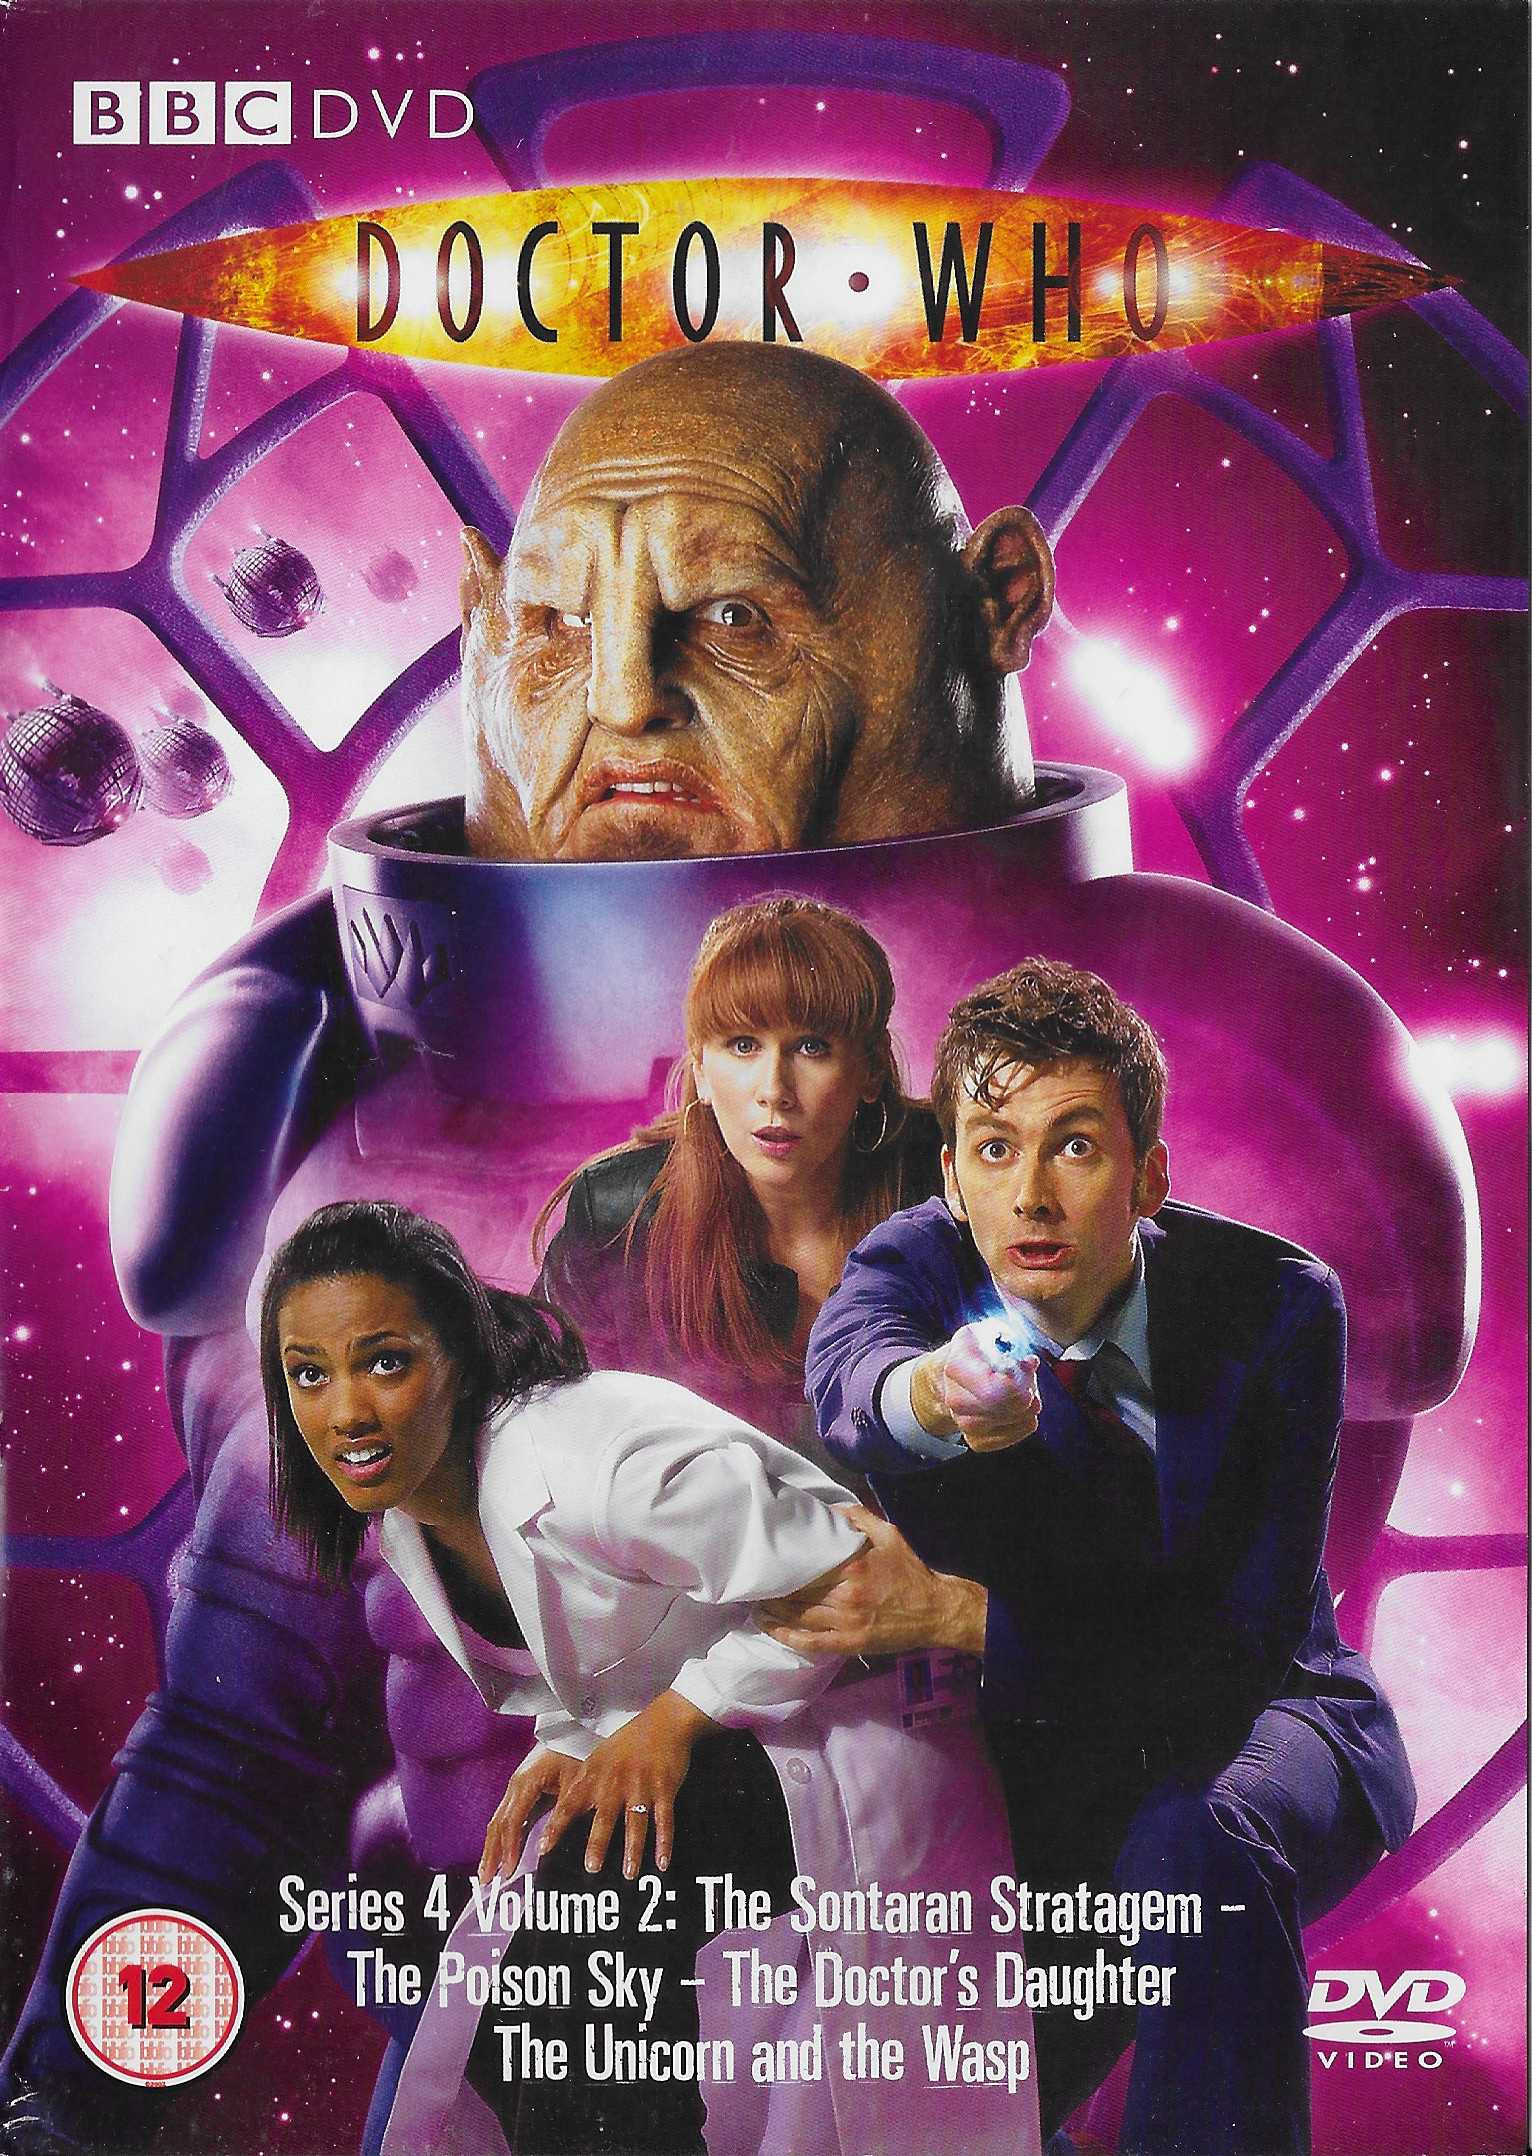 Picture of BBCDVD 2606 Doctor Who - Series 4, volume 2 by artist Helen Raynor / Stephen Greenhorn / Gareth Roberts from the BBC dvds - Records and Tapes library